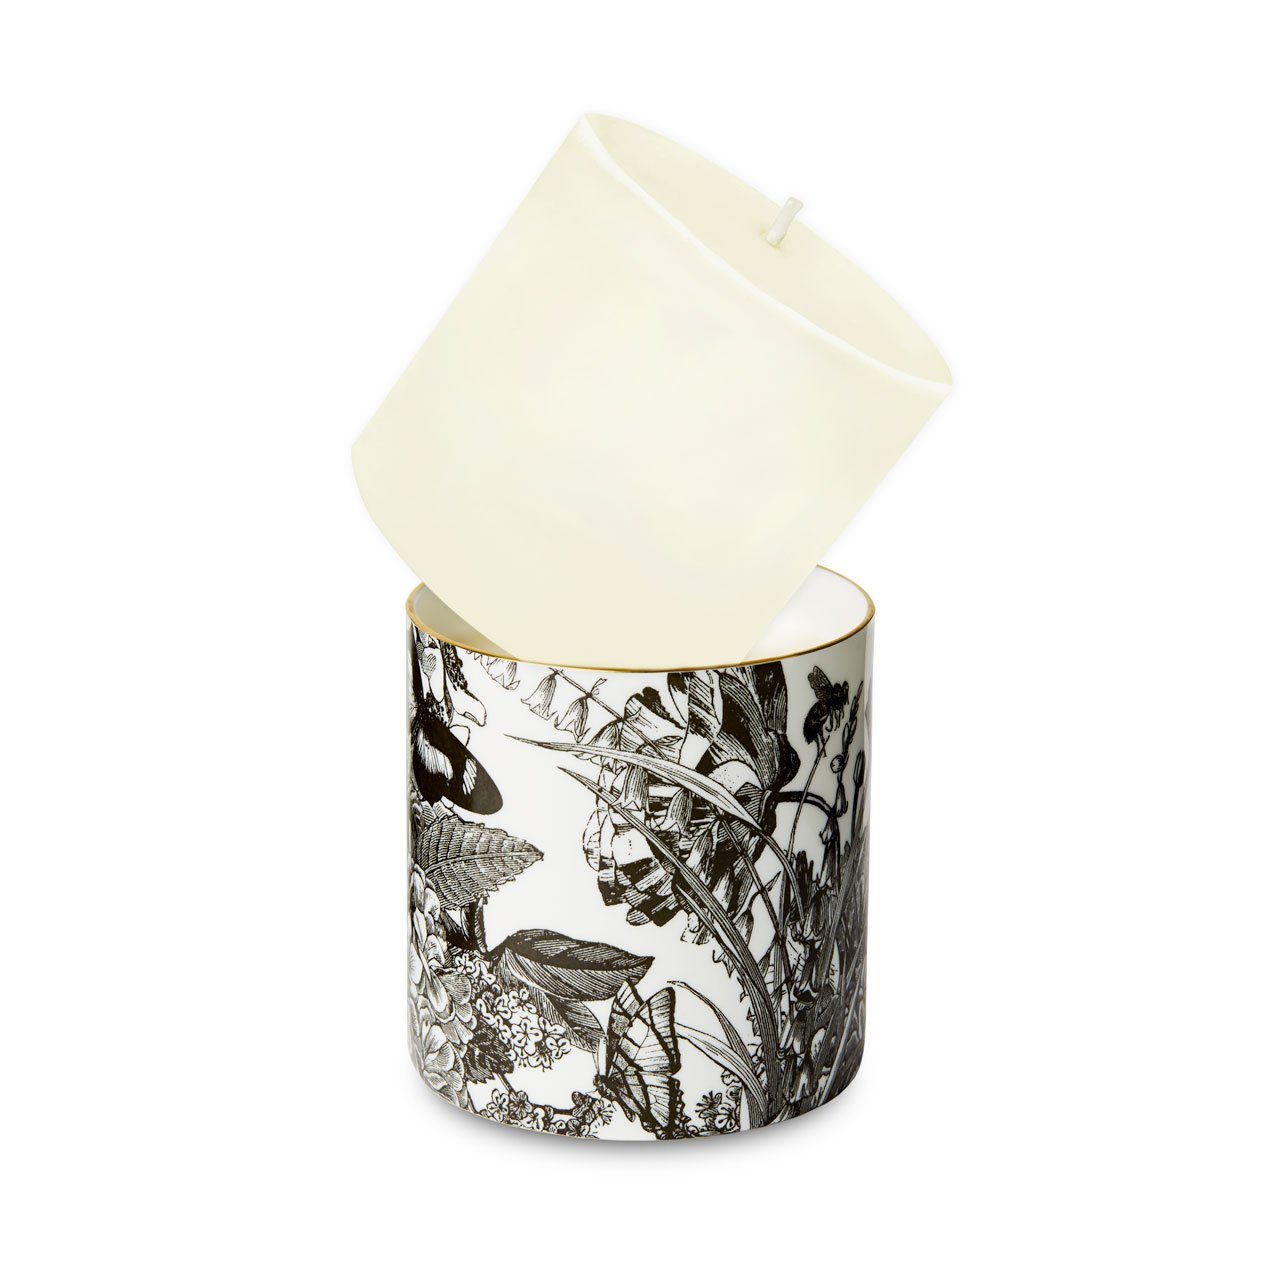 Refill for The Country Garden Ceramic Candle